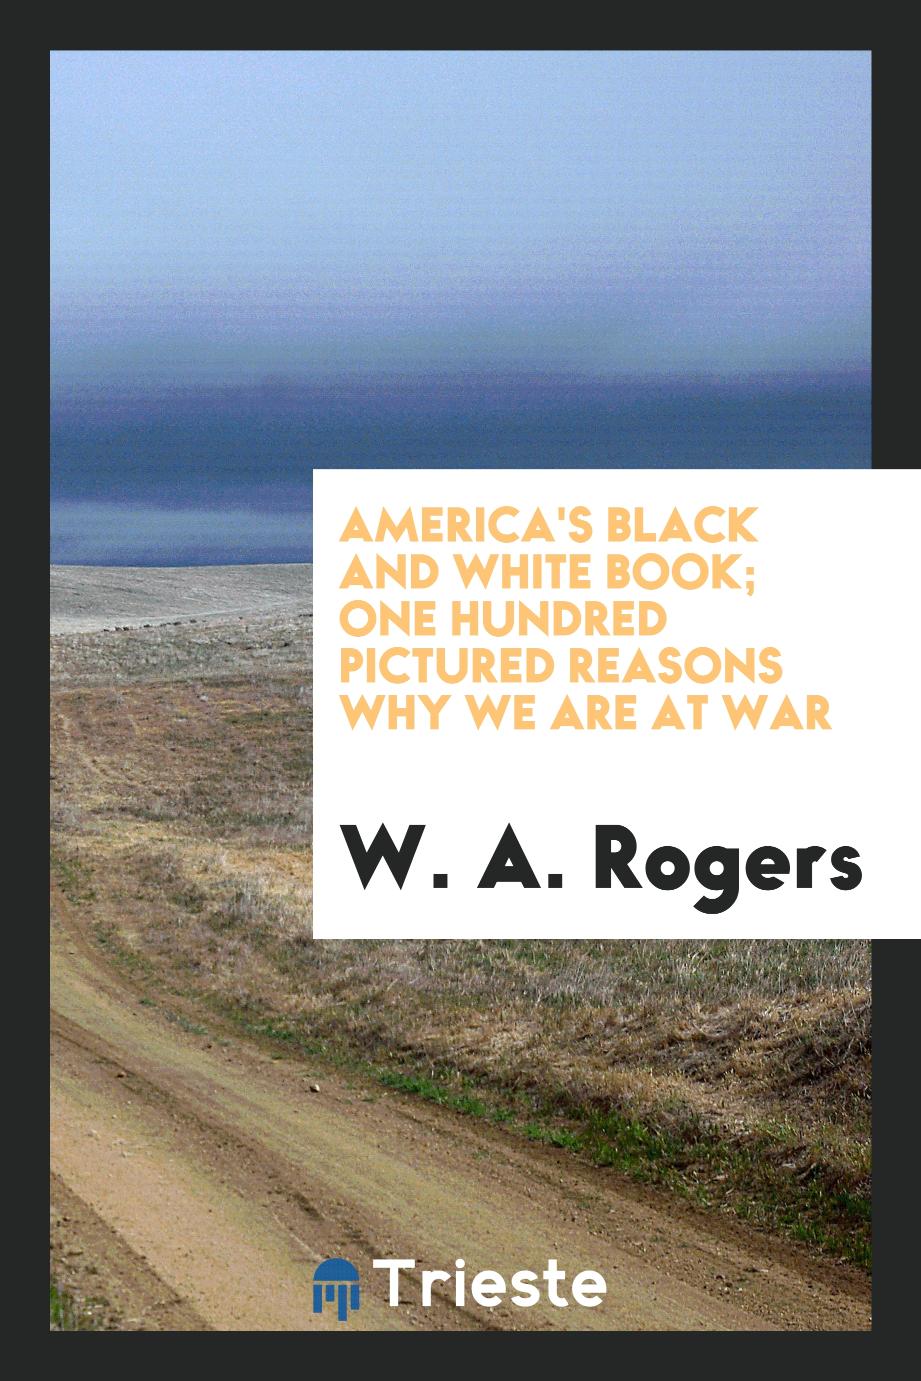 America's black and white book; one hundred pictured reasons why we are at war